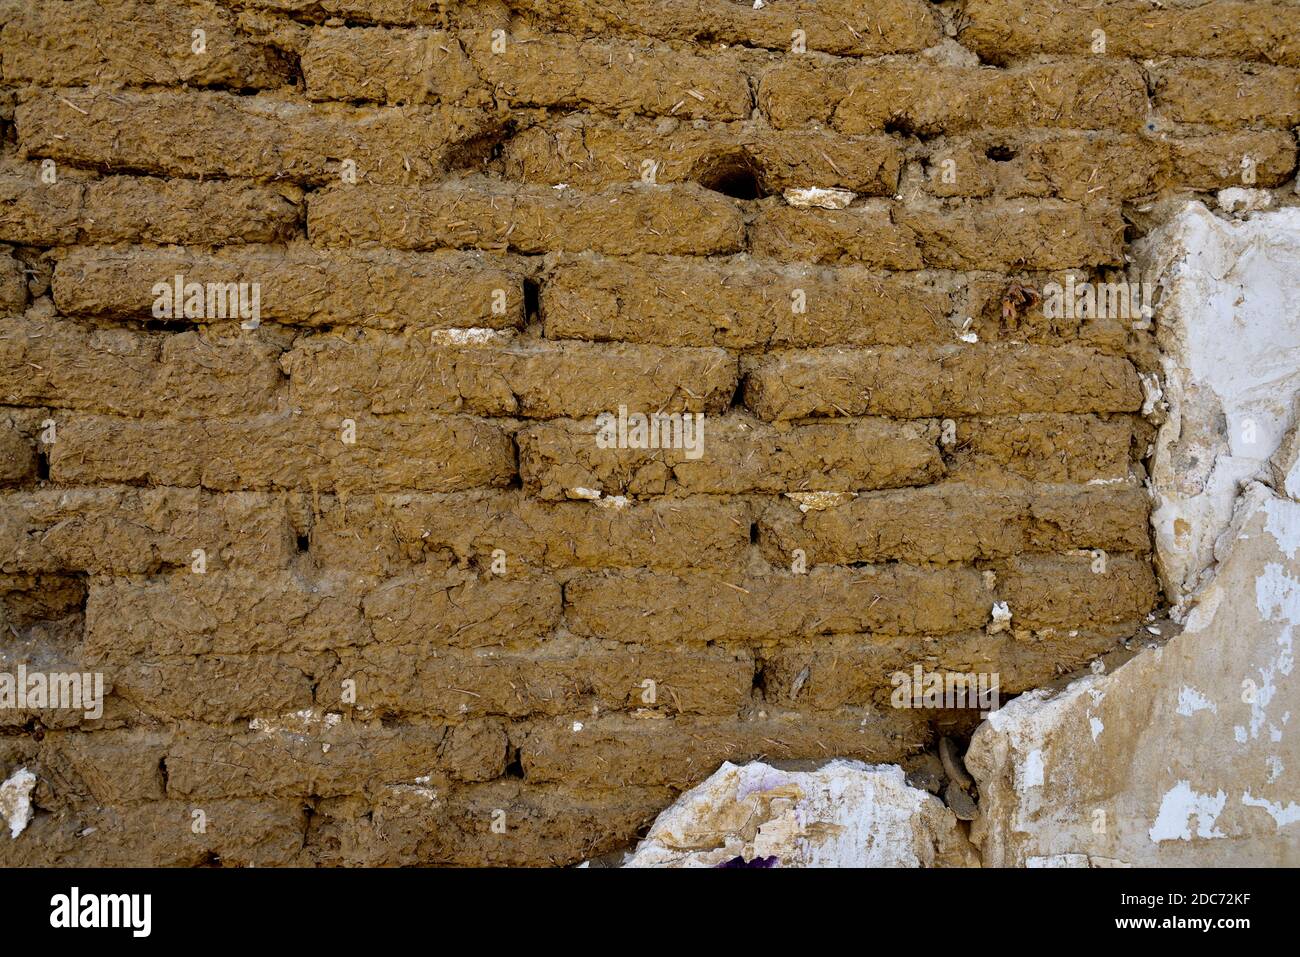 Old handmade clay and straw mud bricks exposed in house wall Stock Photo